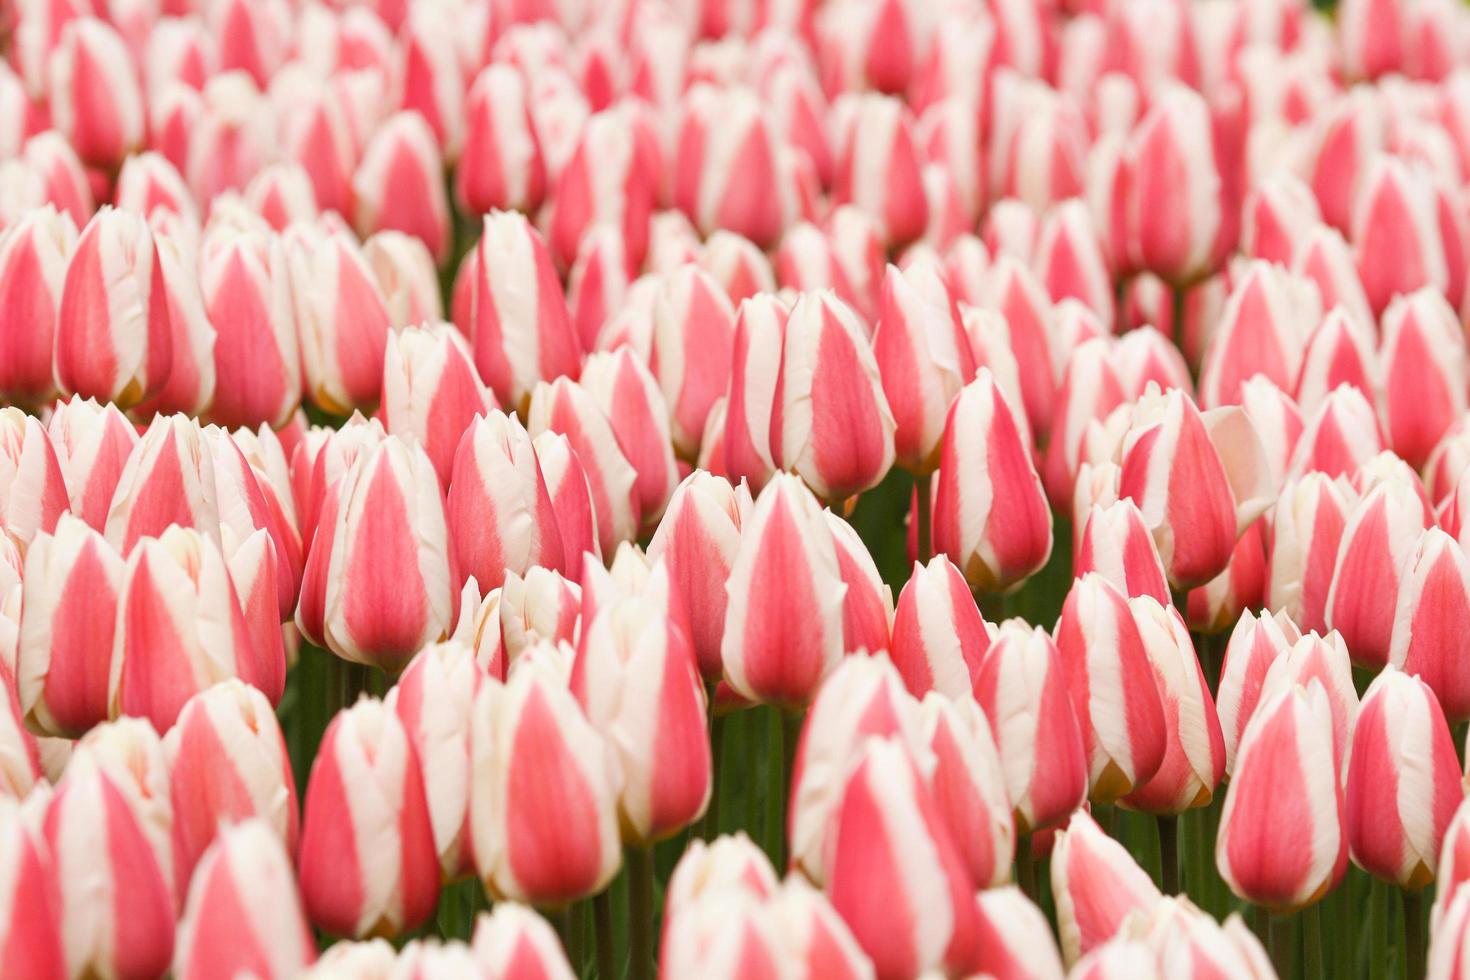 Pink striped tulips in the garden photo